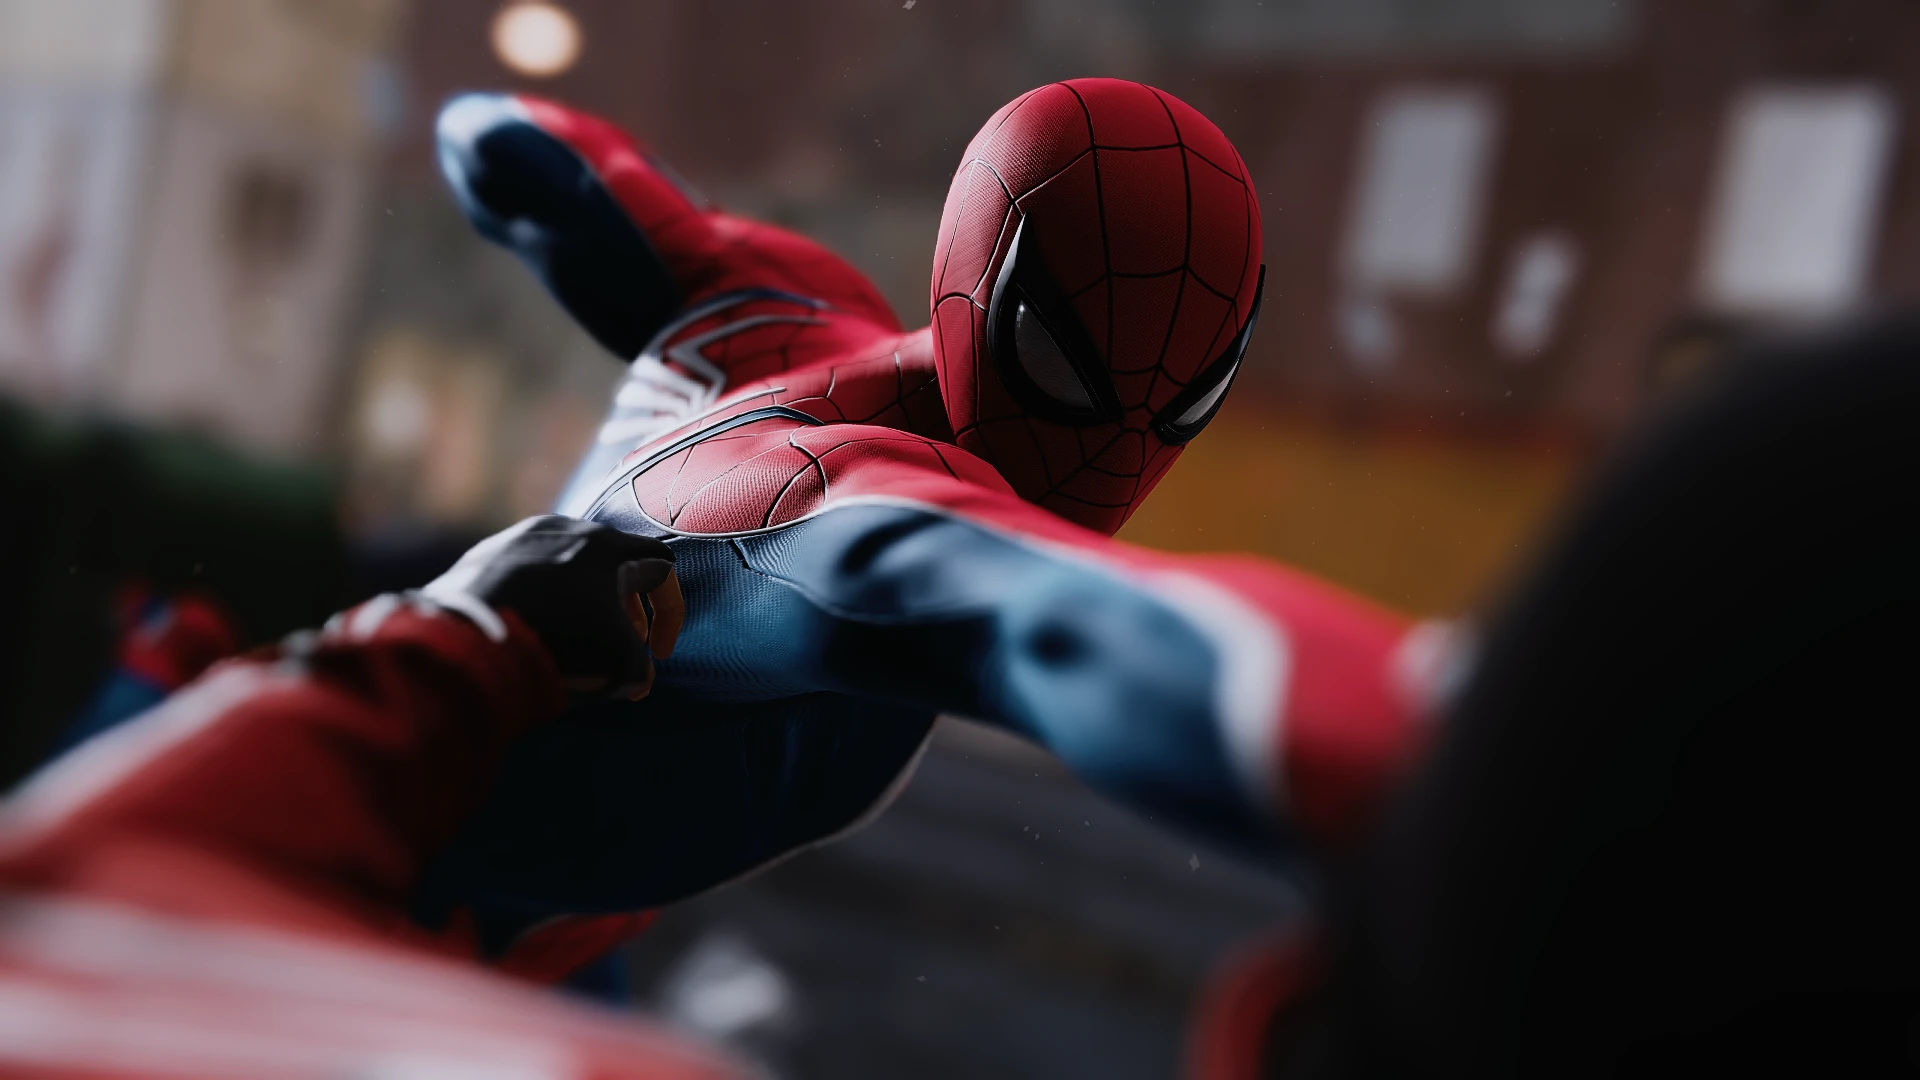 Yet Another Advanced Suit MK2 at Marvel's Spider-Man Remastered Nexus -  Mods and community